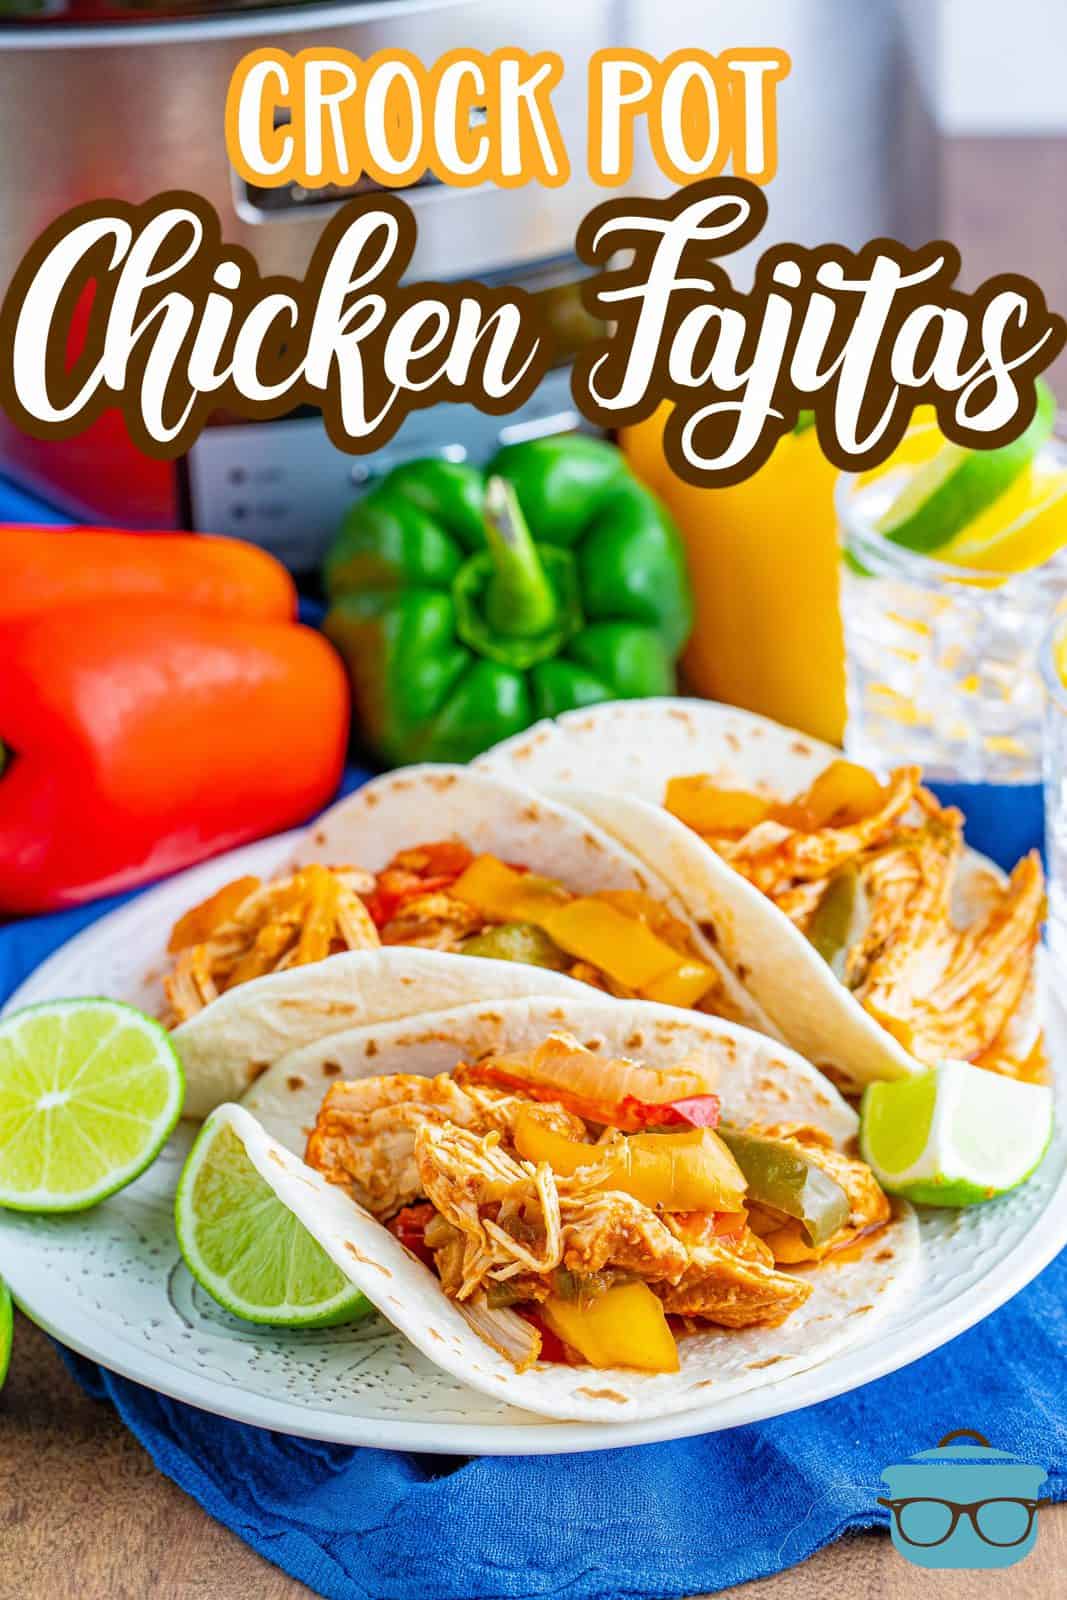 Crock Pot Chicken Fajitas recipe from The Country Cook, fajita filled flour tortillas shown on a white plate with slices of lime.